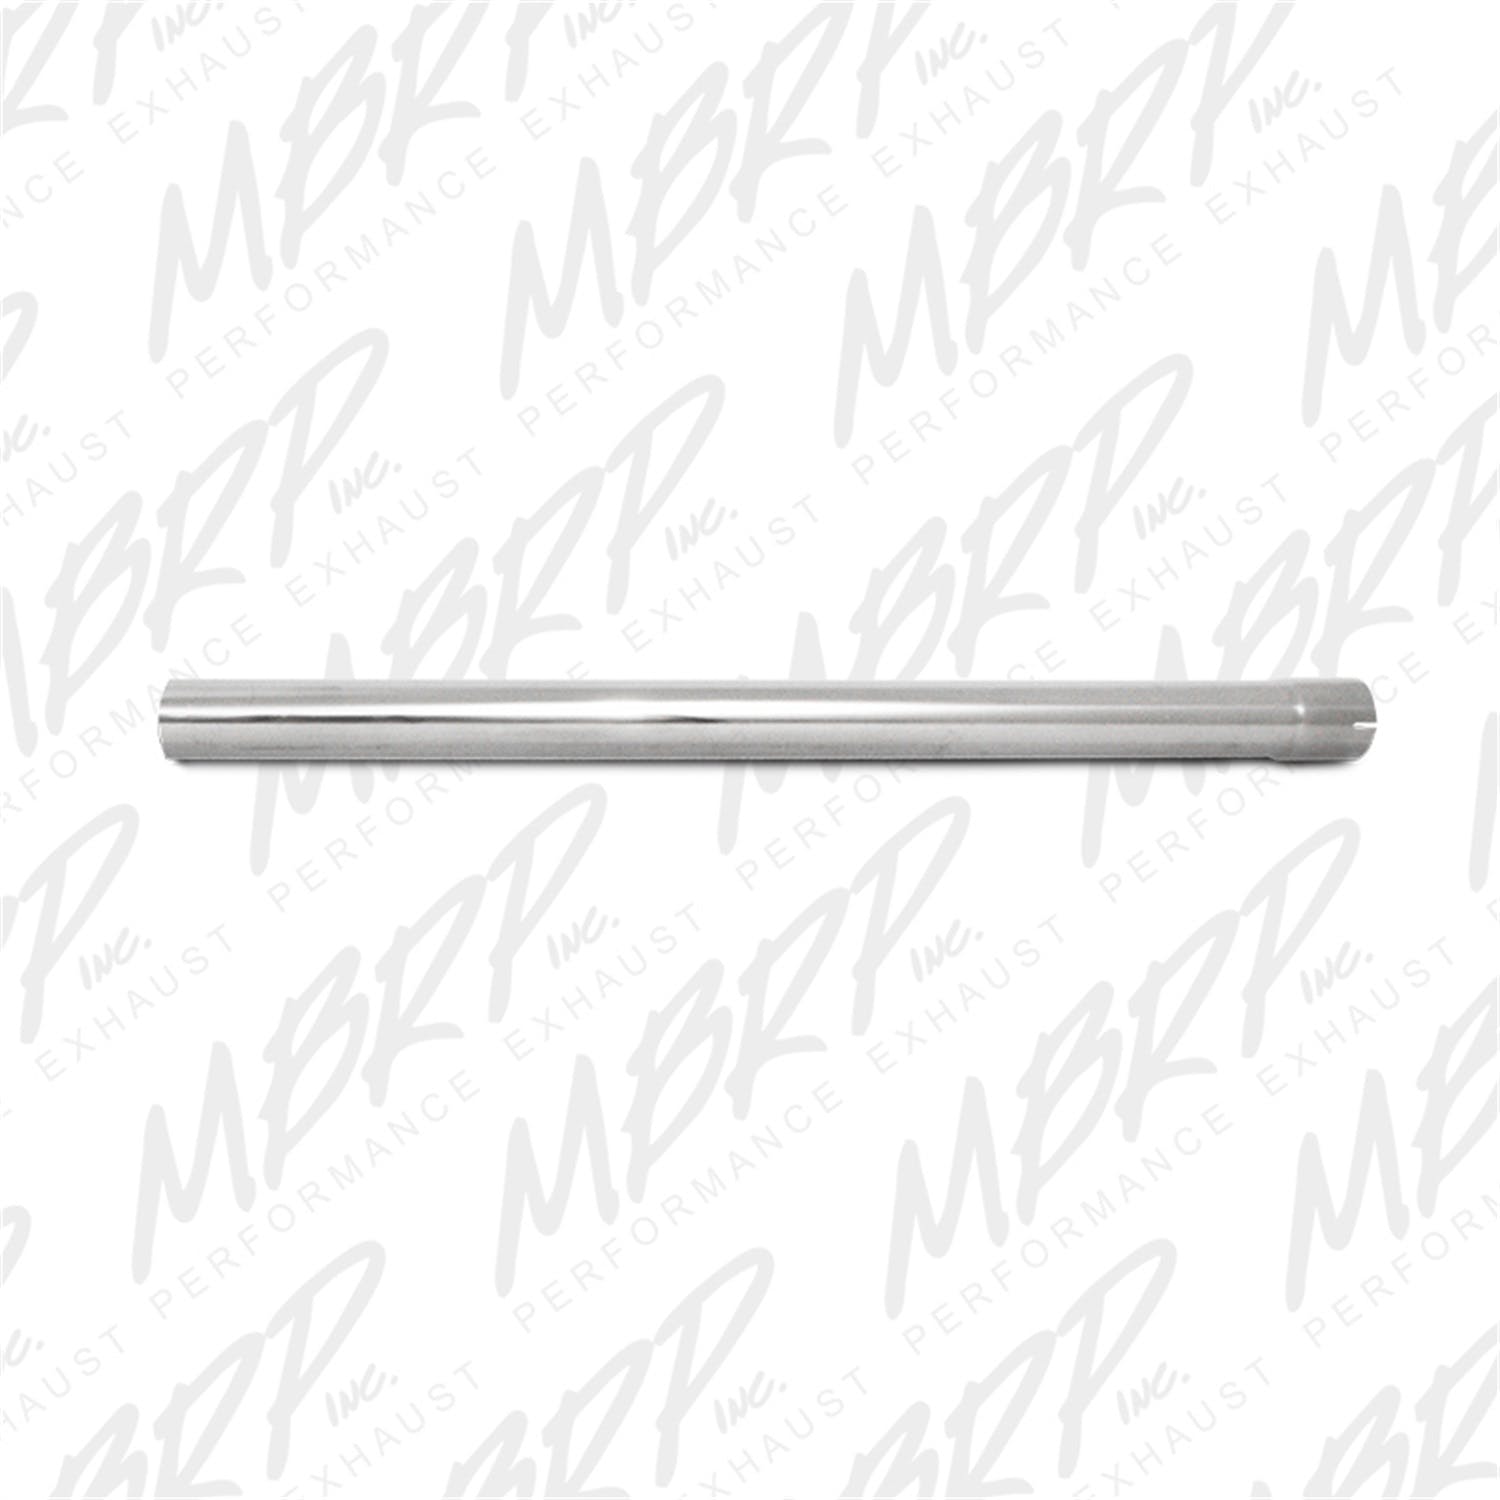 MBRP Exhaust GP25304 2.5in. Straight Tube; T304-90in. in length